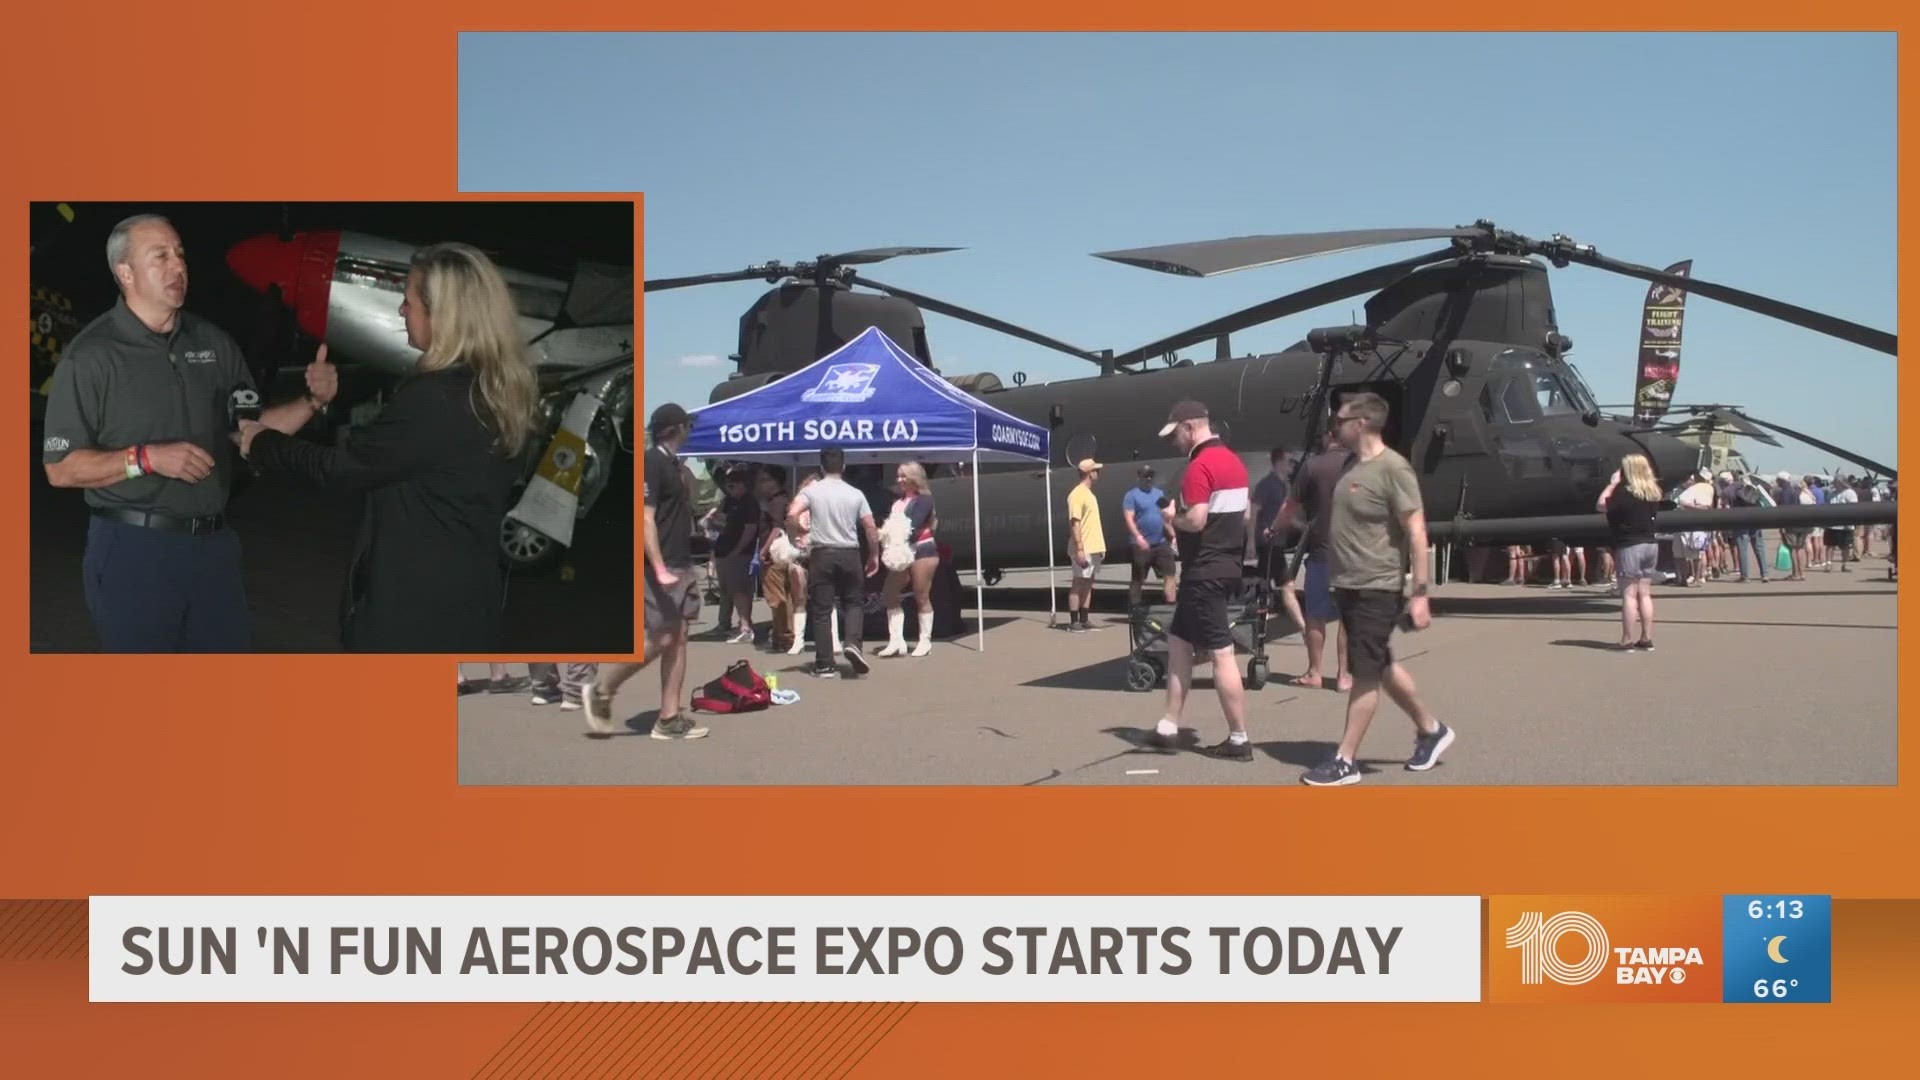 The expo features air shows, special musical guests and activities for the whole family.